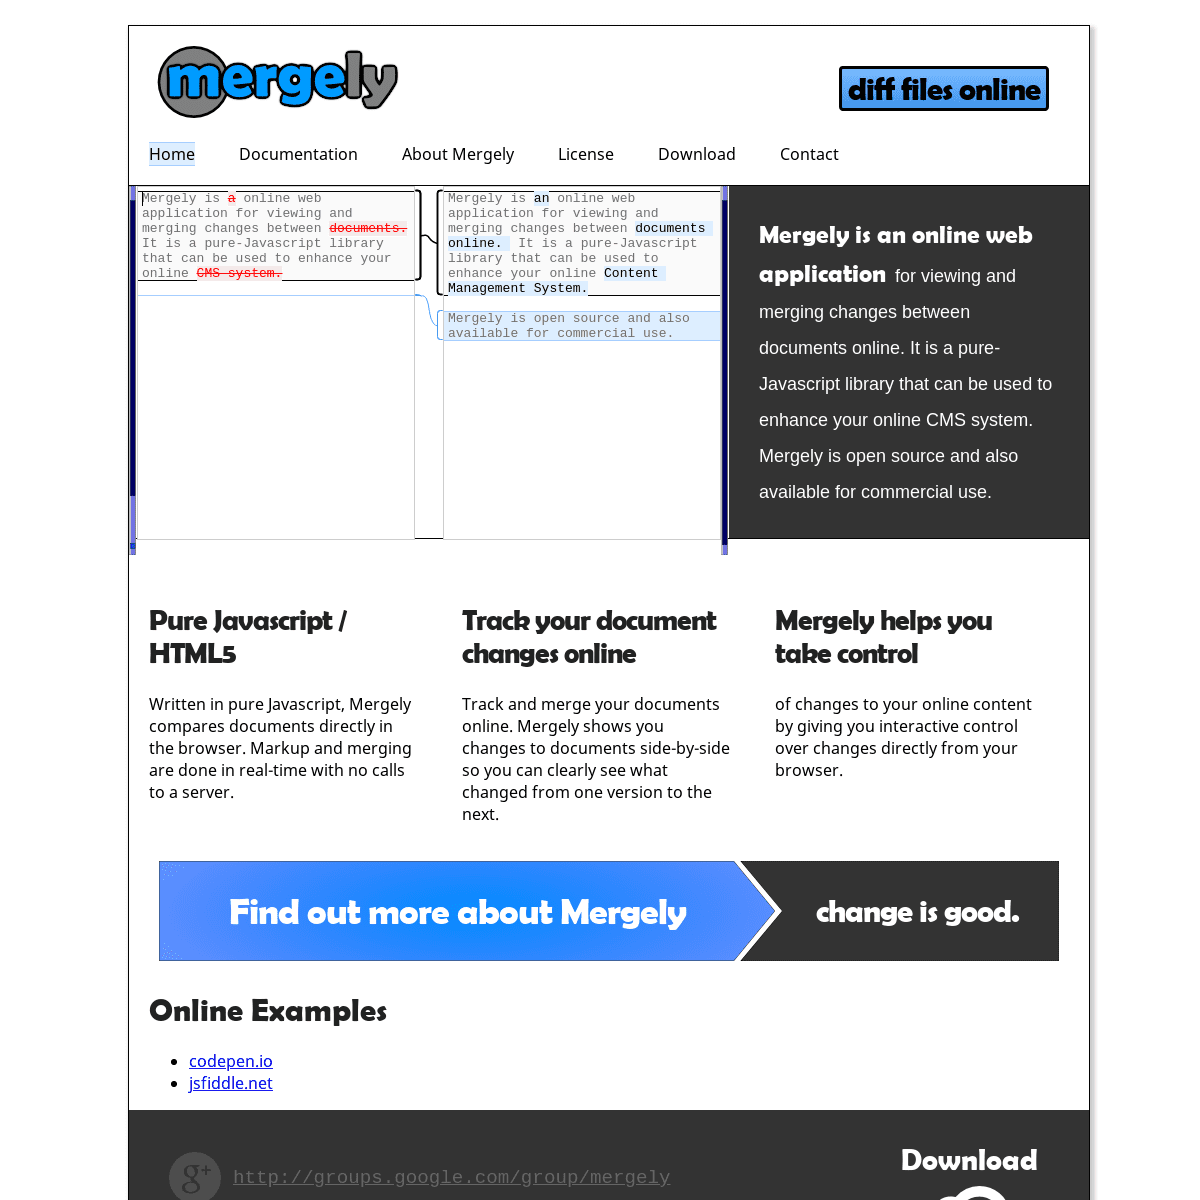 A complete backup of https://mergely.com